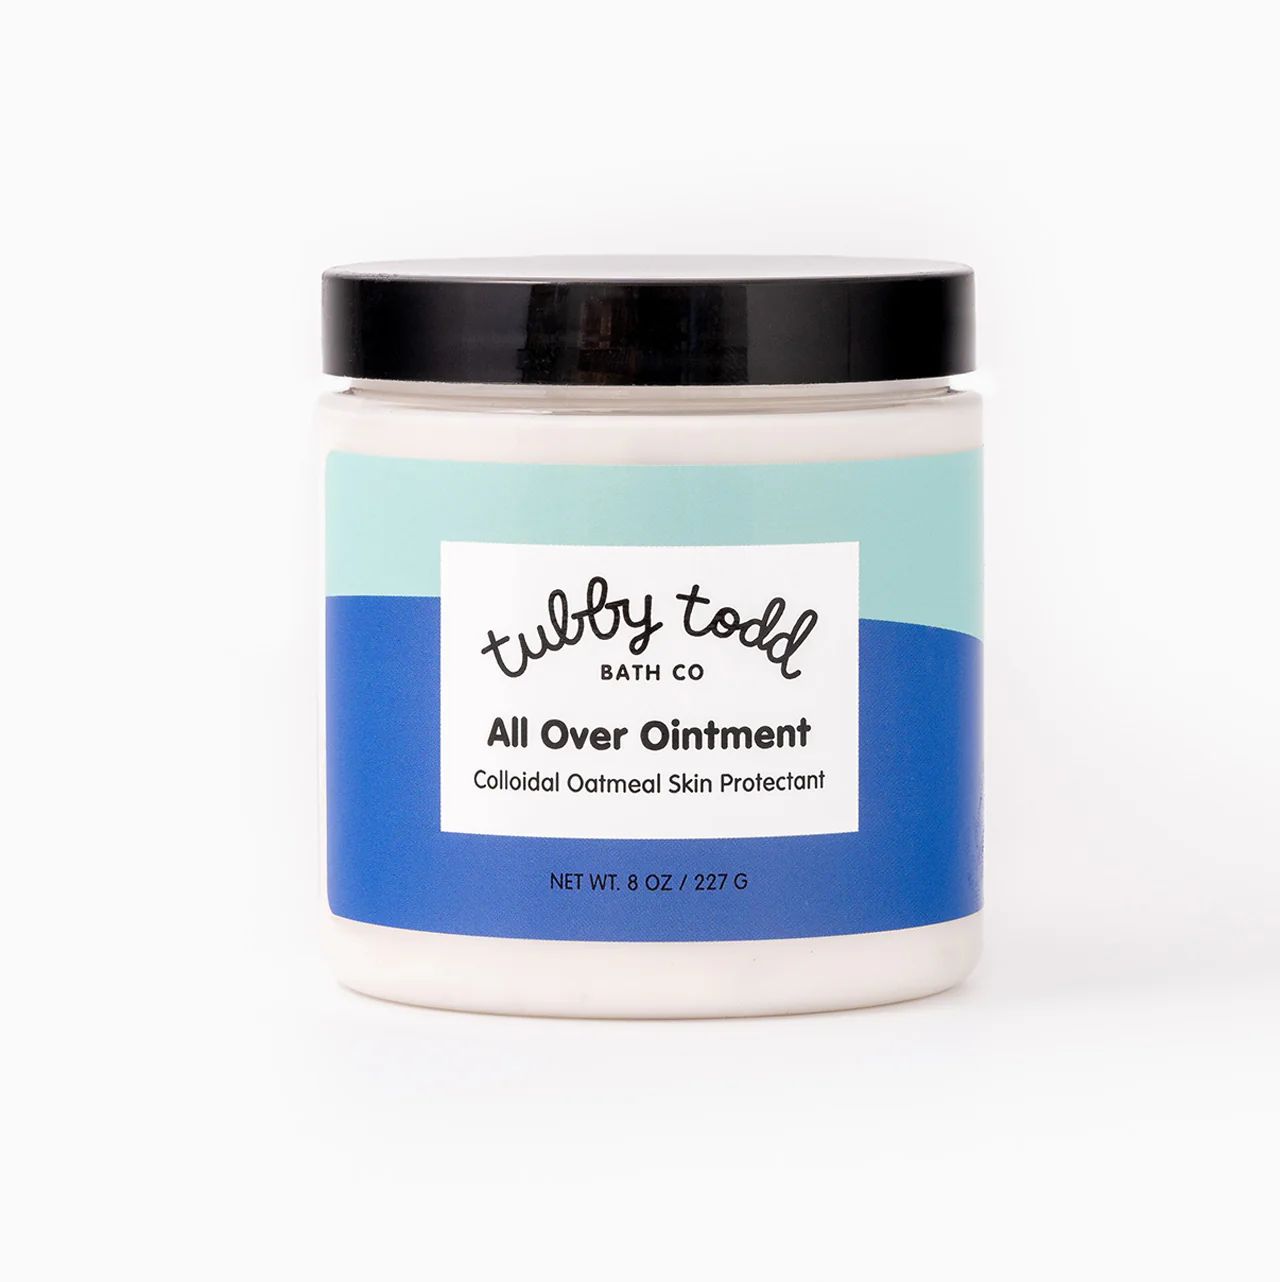 All Over Ointment | Tubby Todd Bath Co